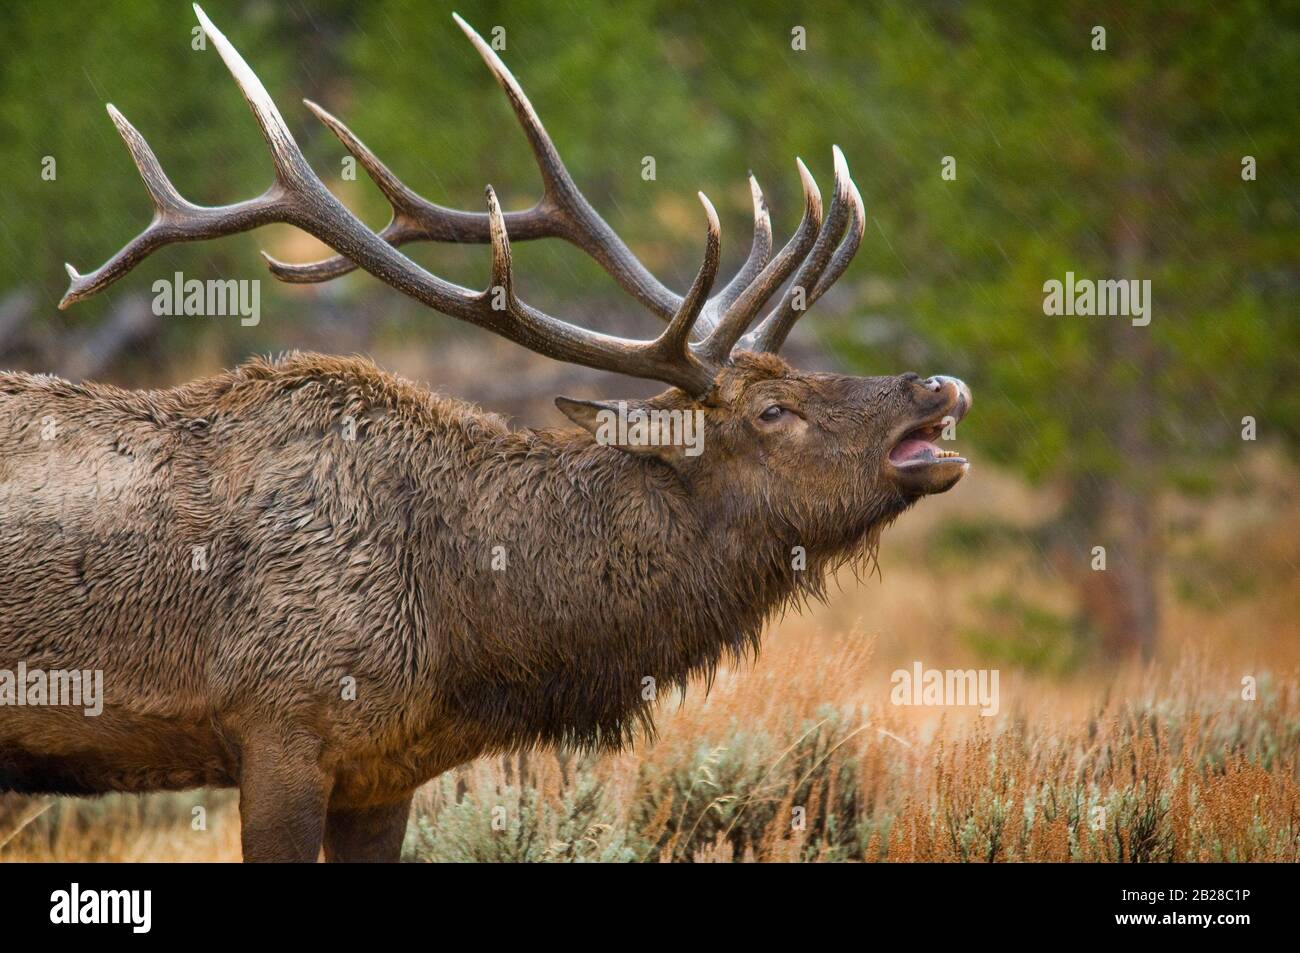 Large Bull Elk Bugling with an open mouth and exposed teeth all wet in the rain among the fir trees and high desert sage shrubs Stock Photo